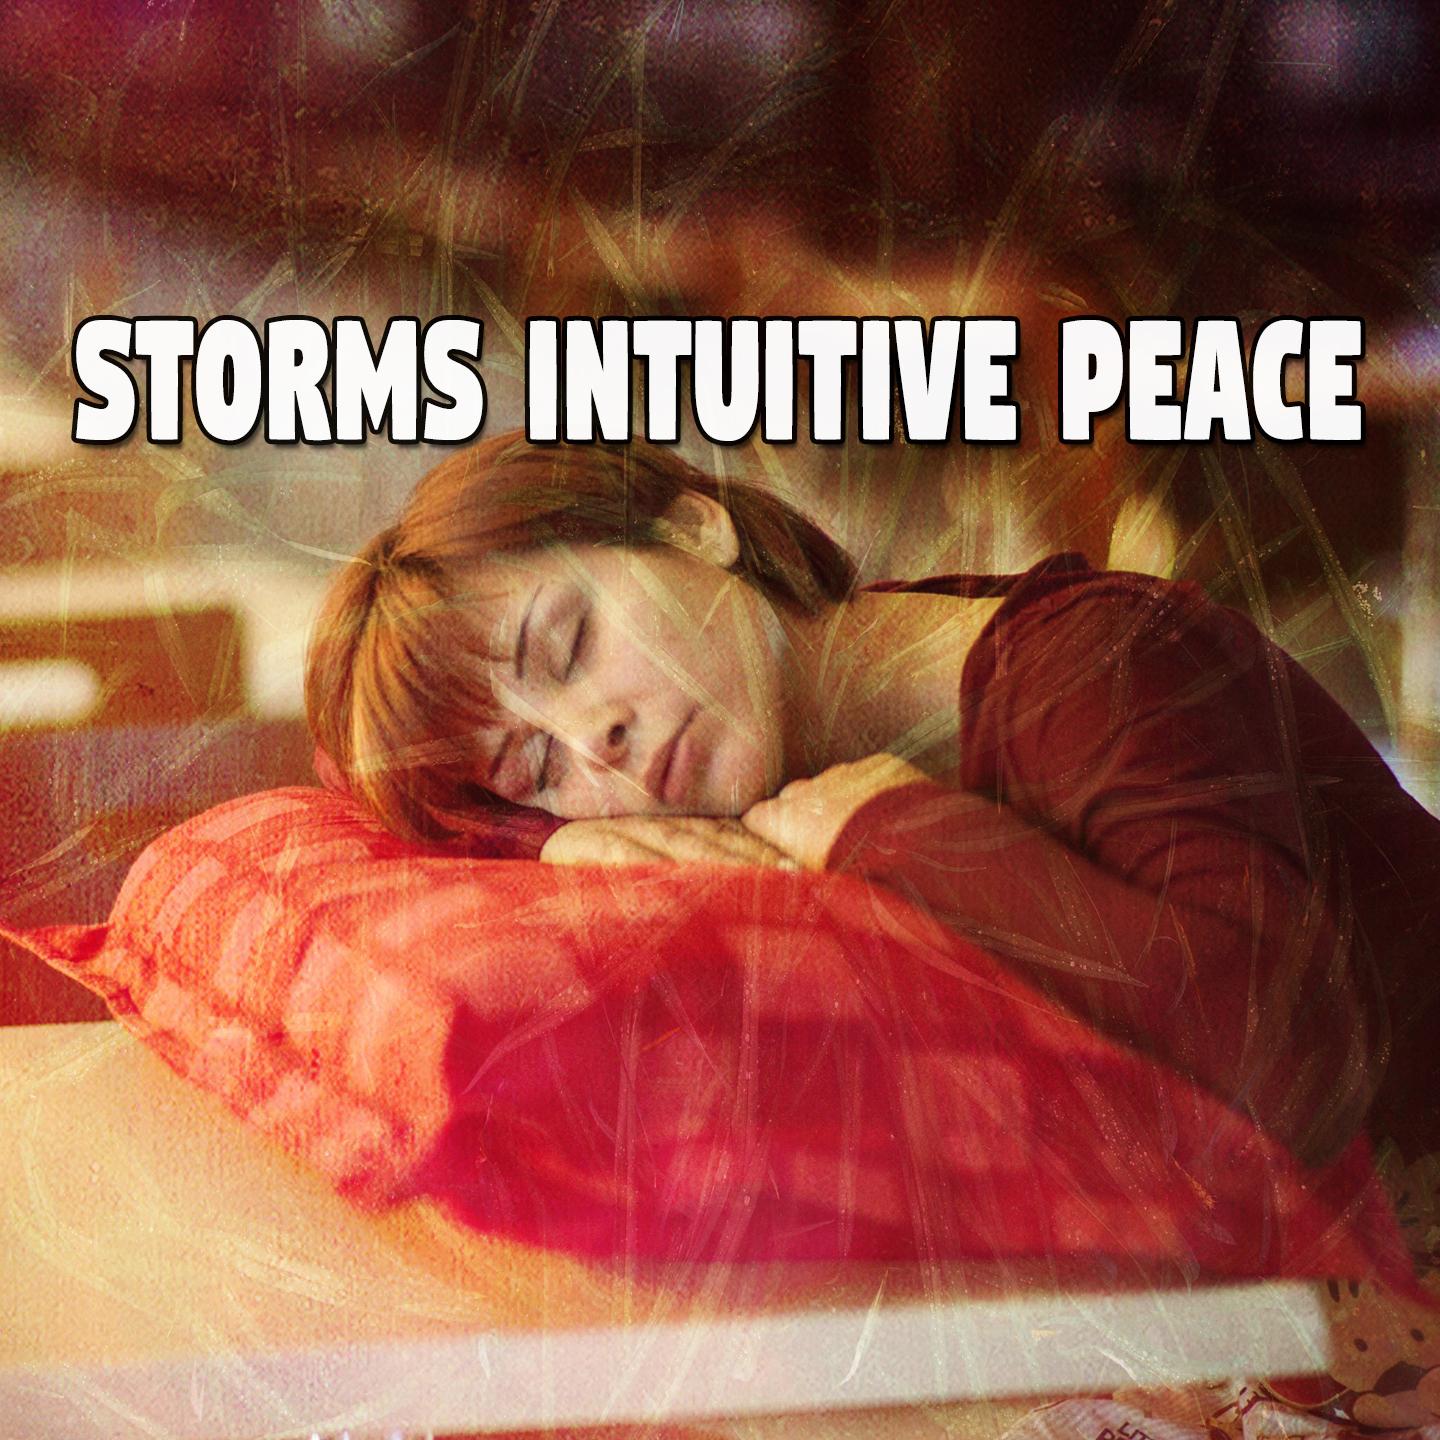 Storms Intuitive Peace